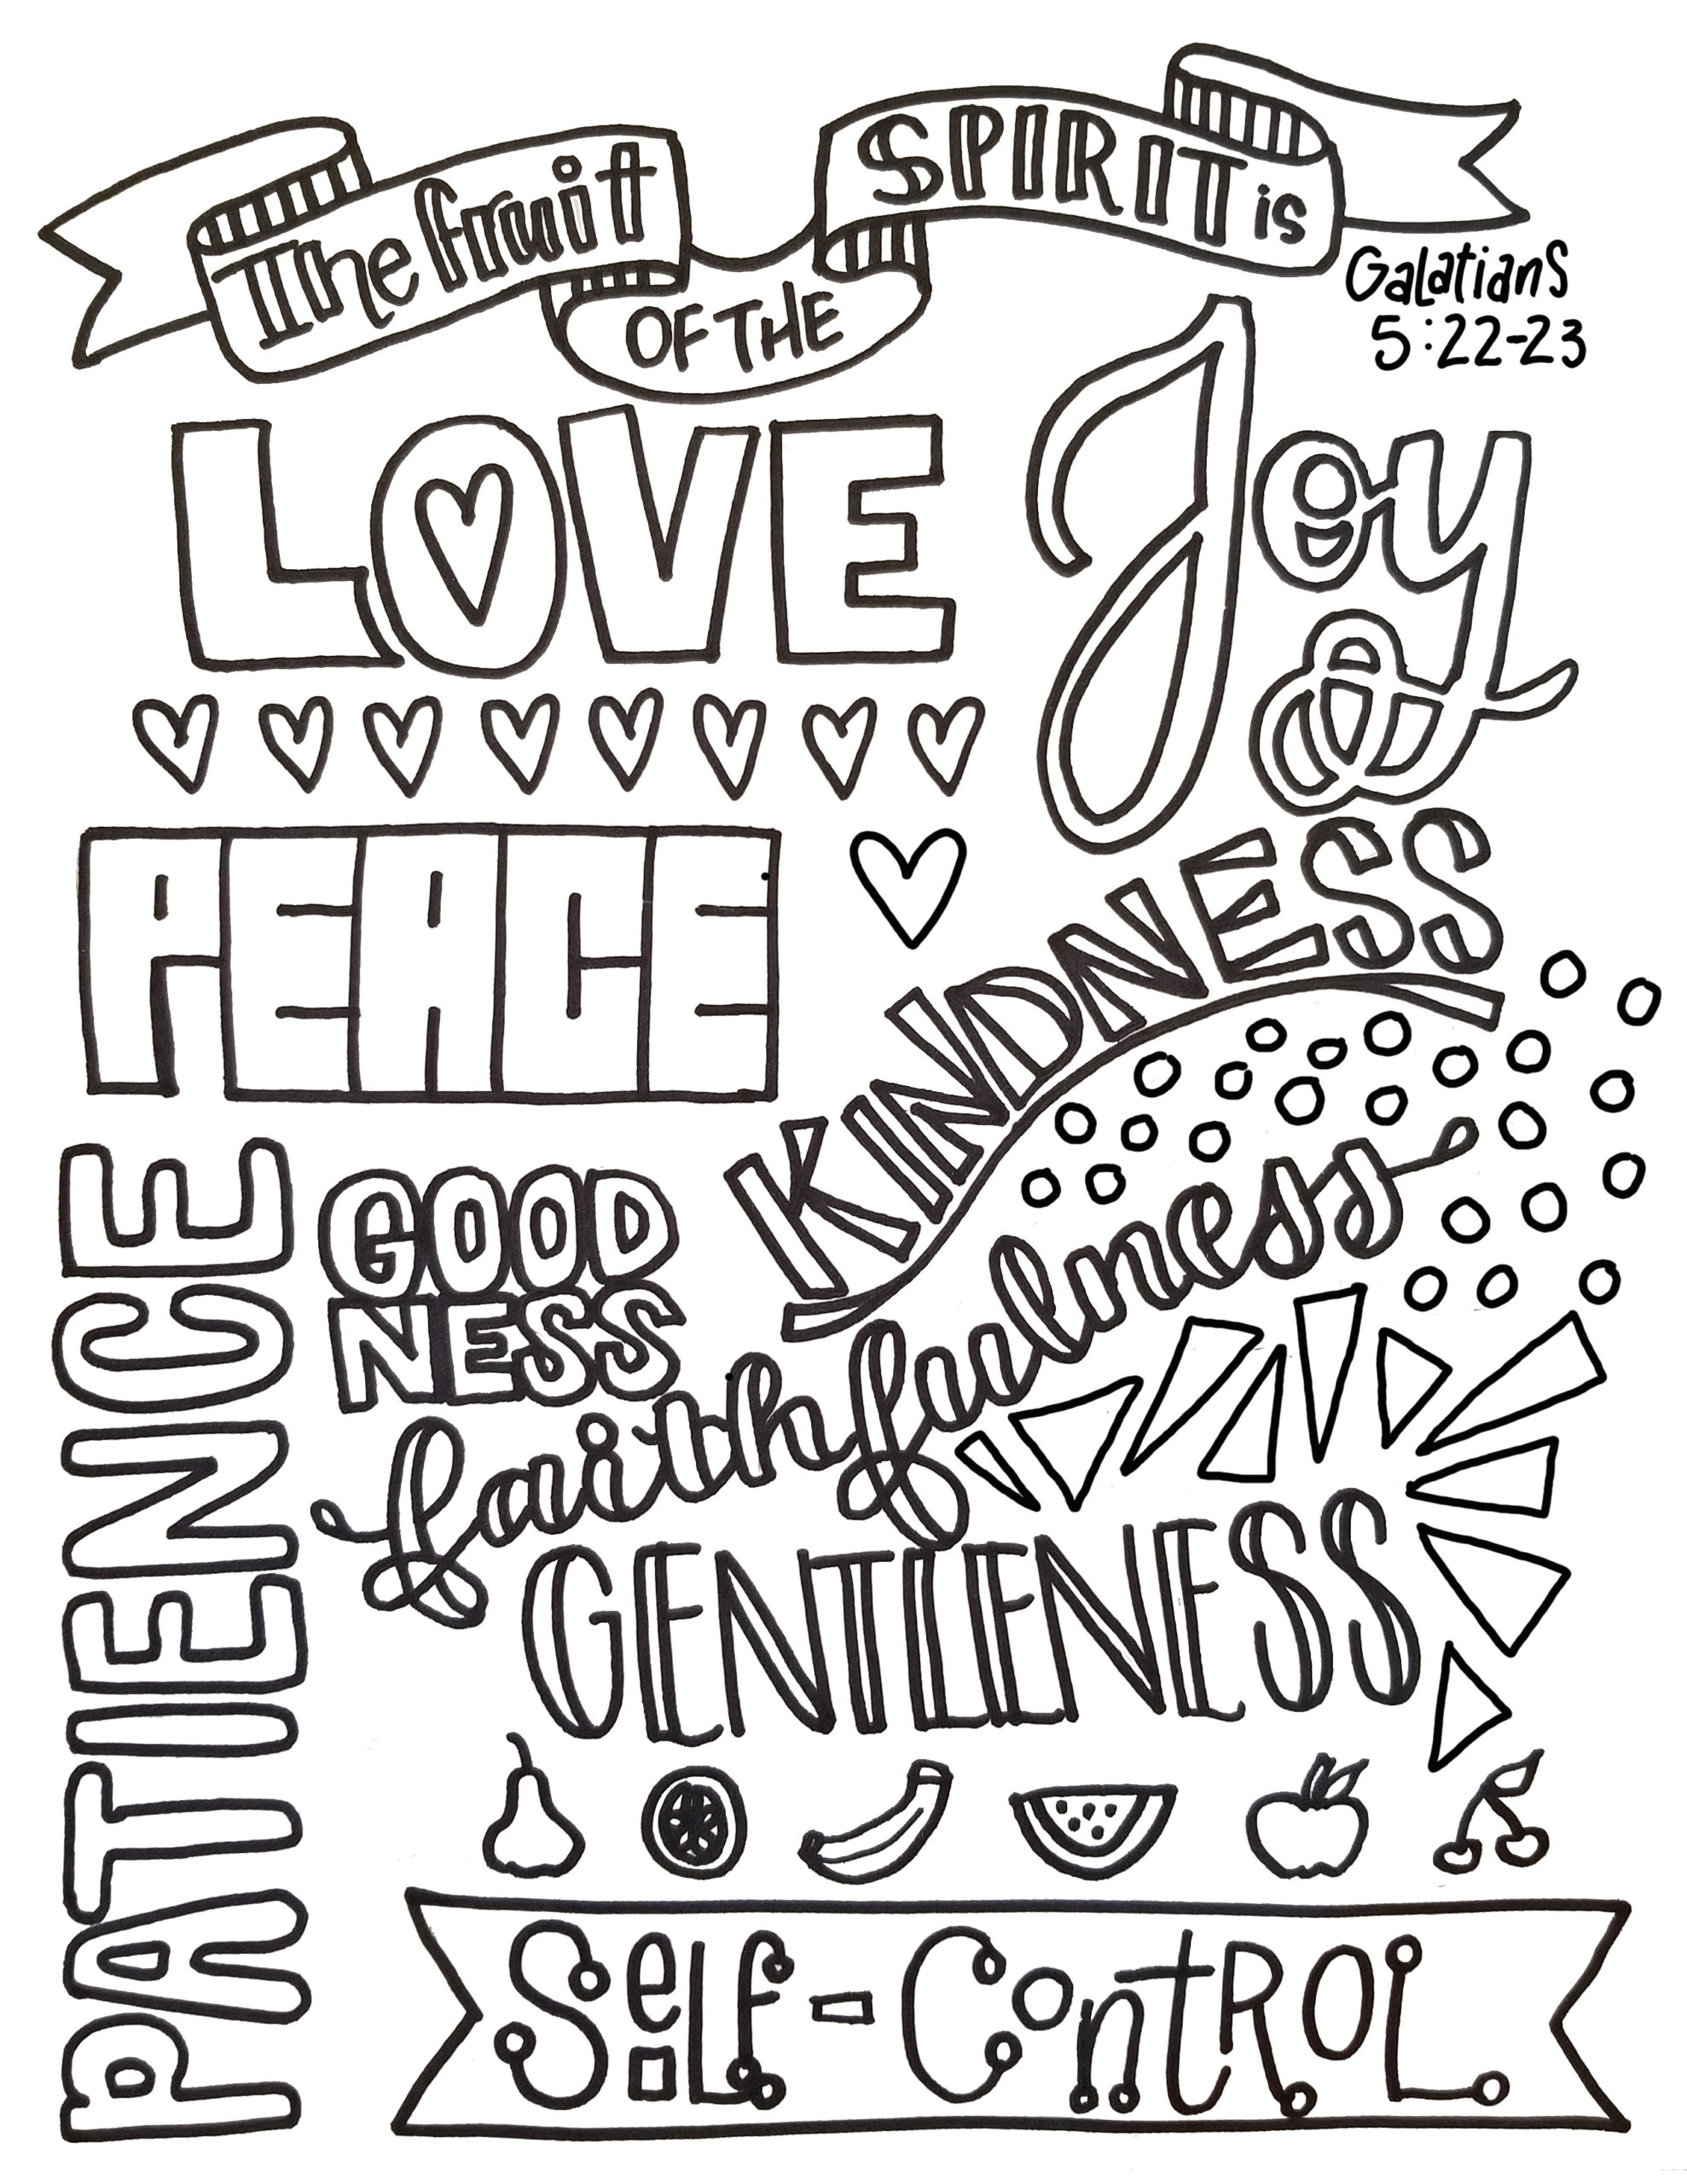 Fruit of the Spirit Coloring Page - Lutheran Homeschool